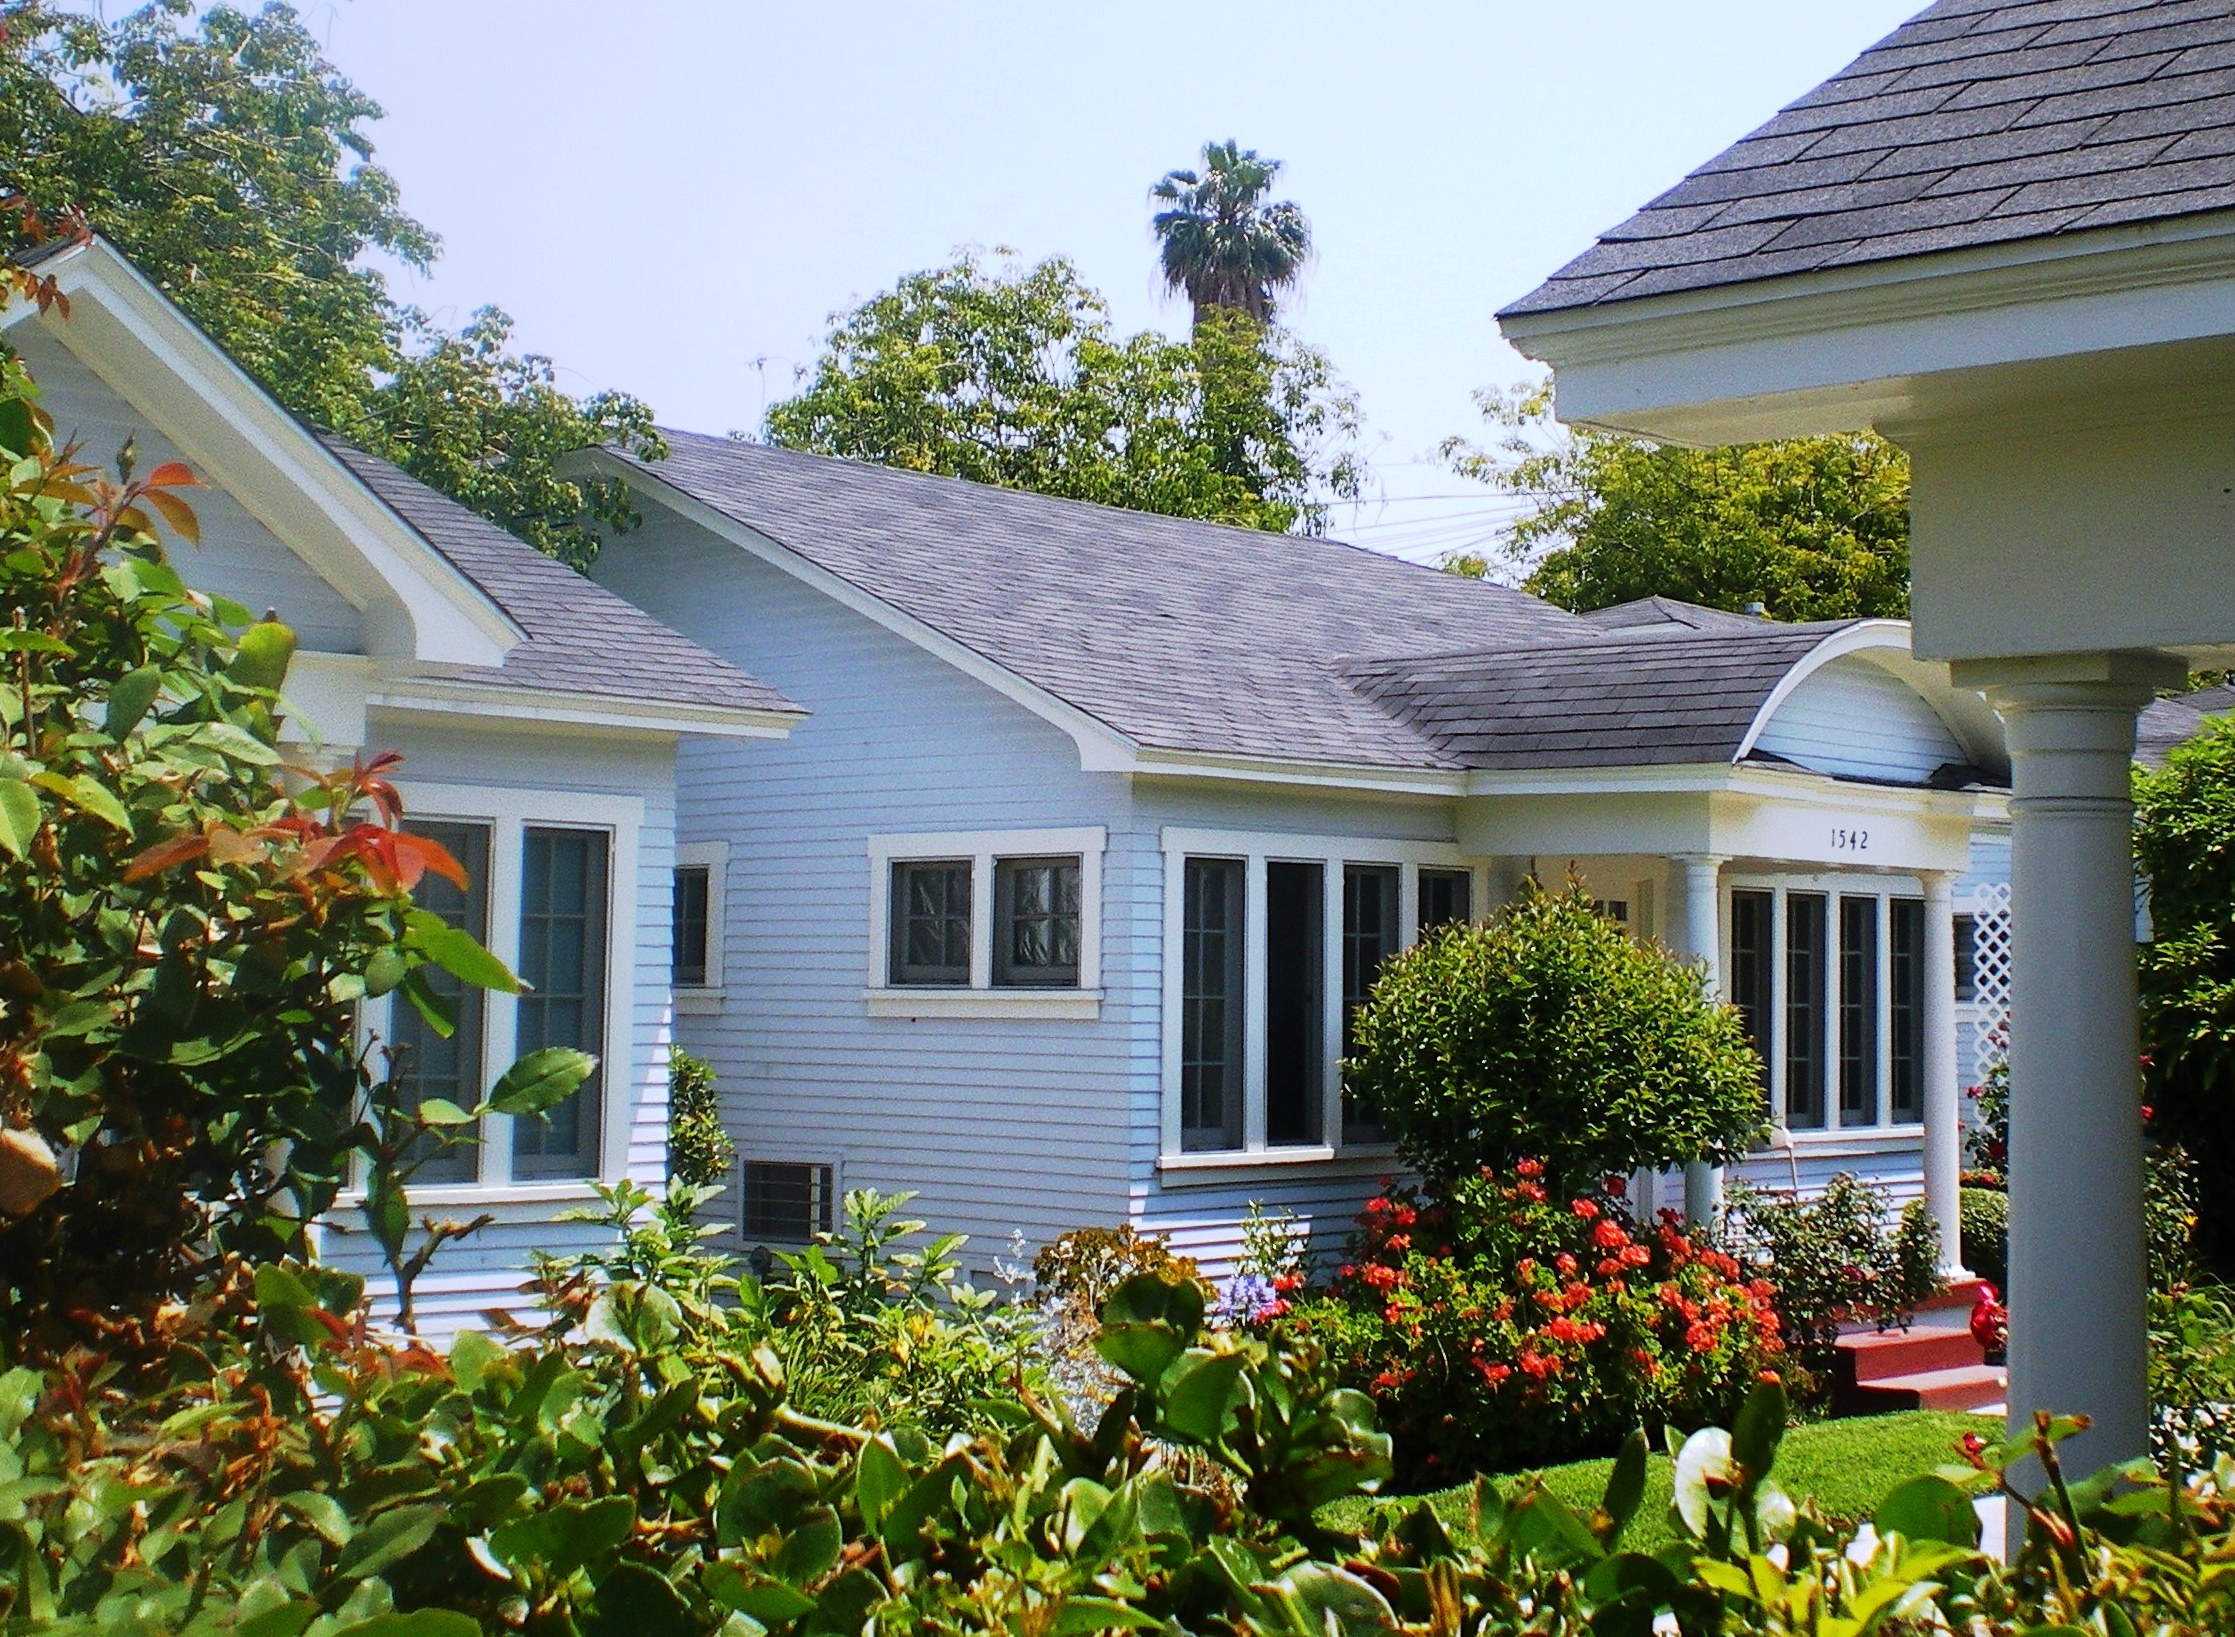 File:St. Andrews Bungalow Court, Los Angeles.JPG - Wikimedia Commons